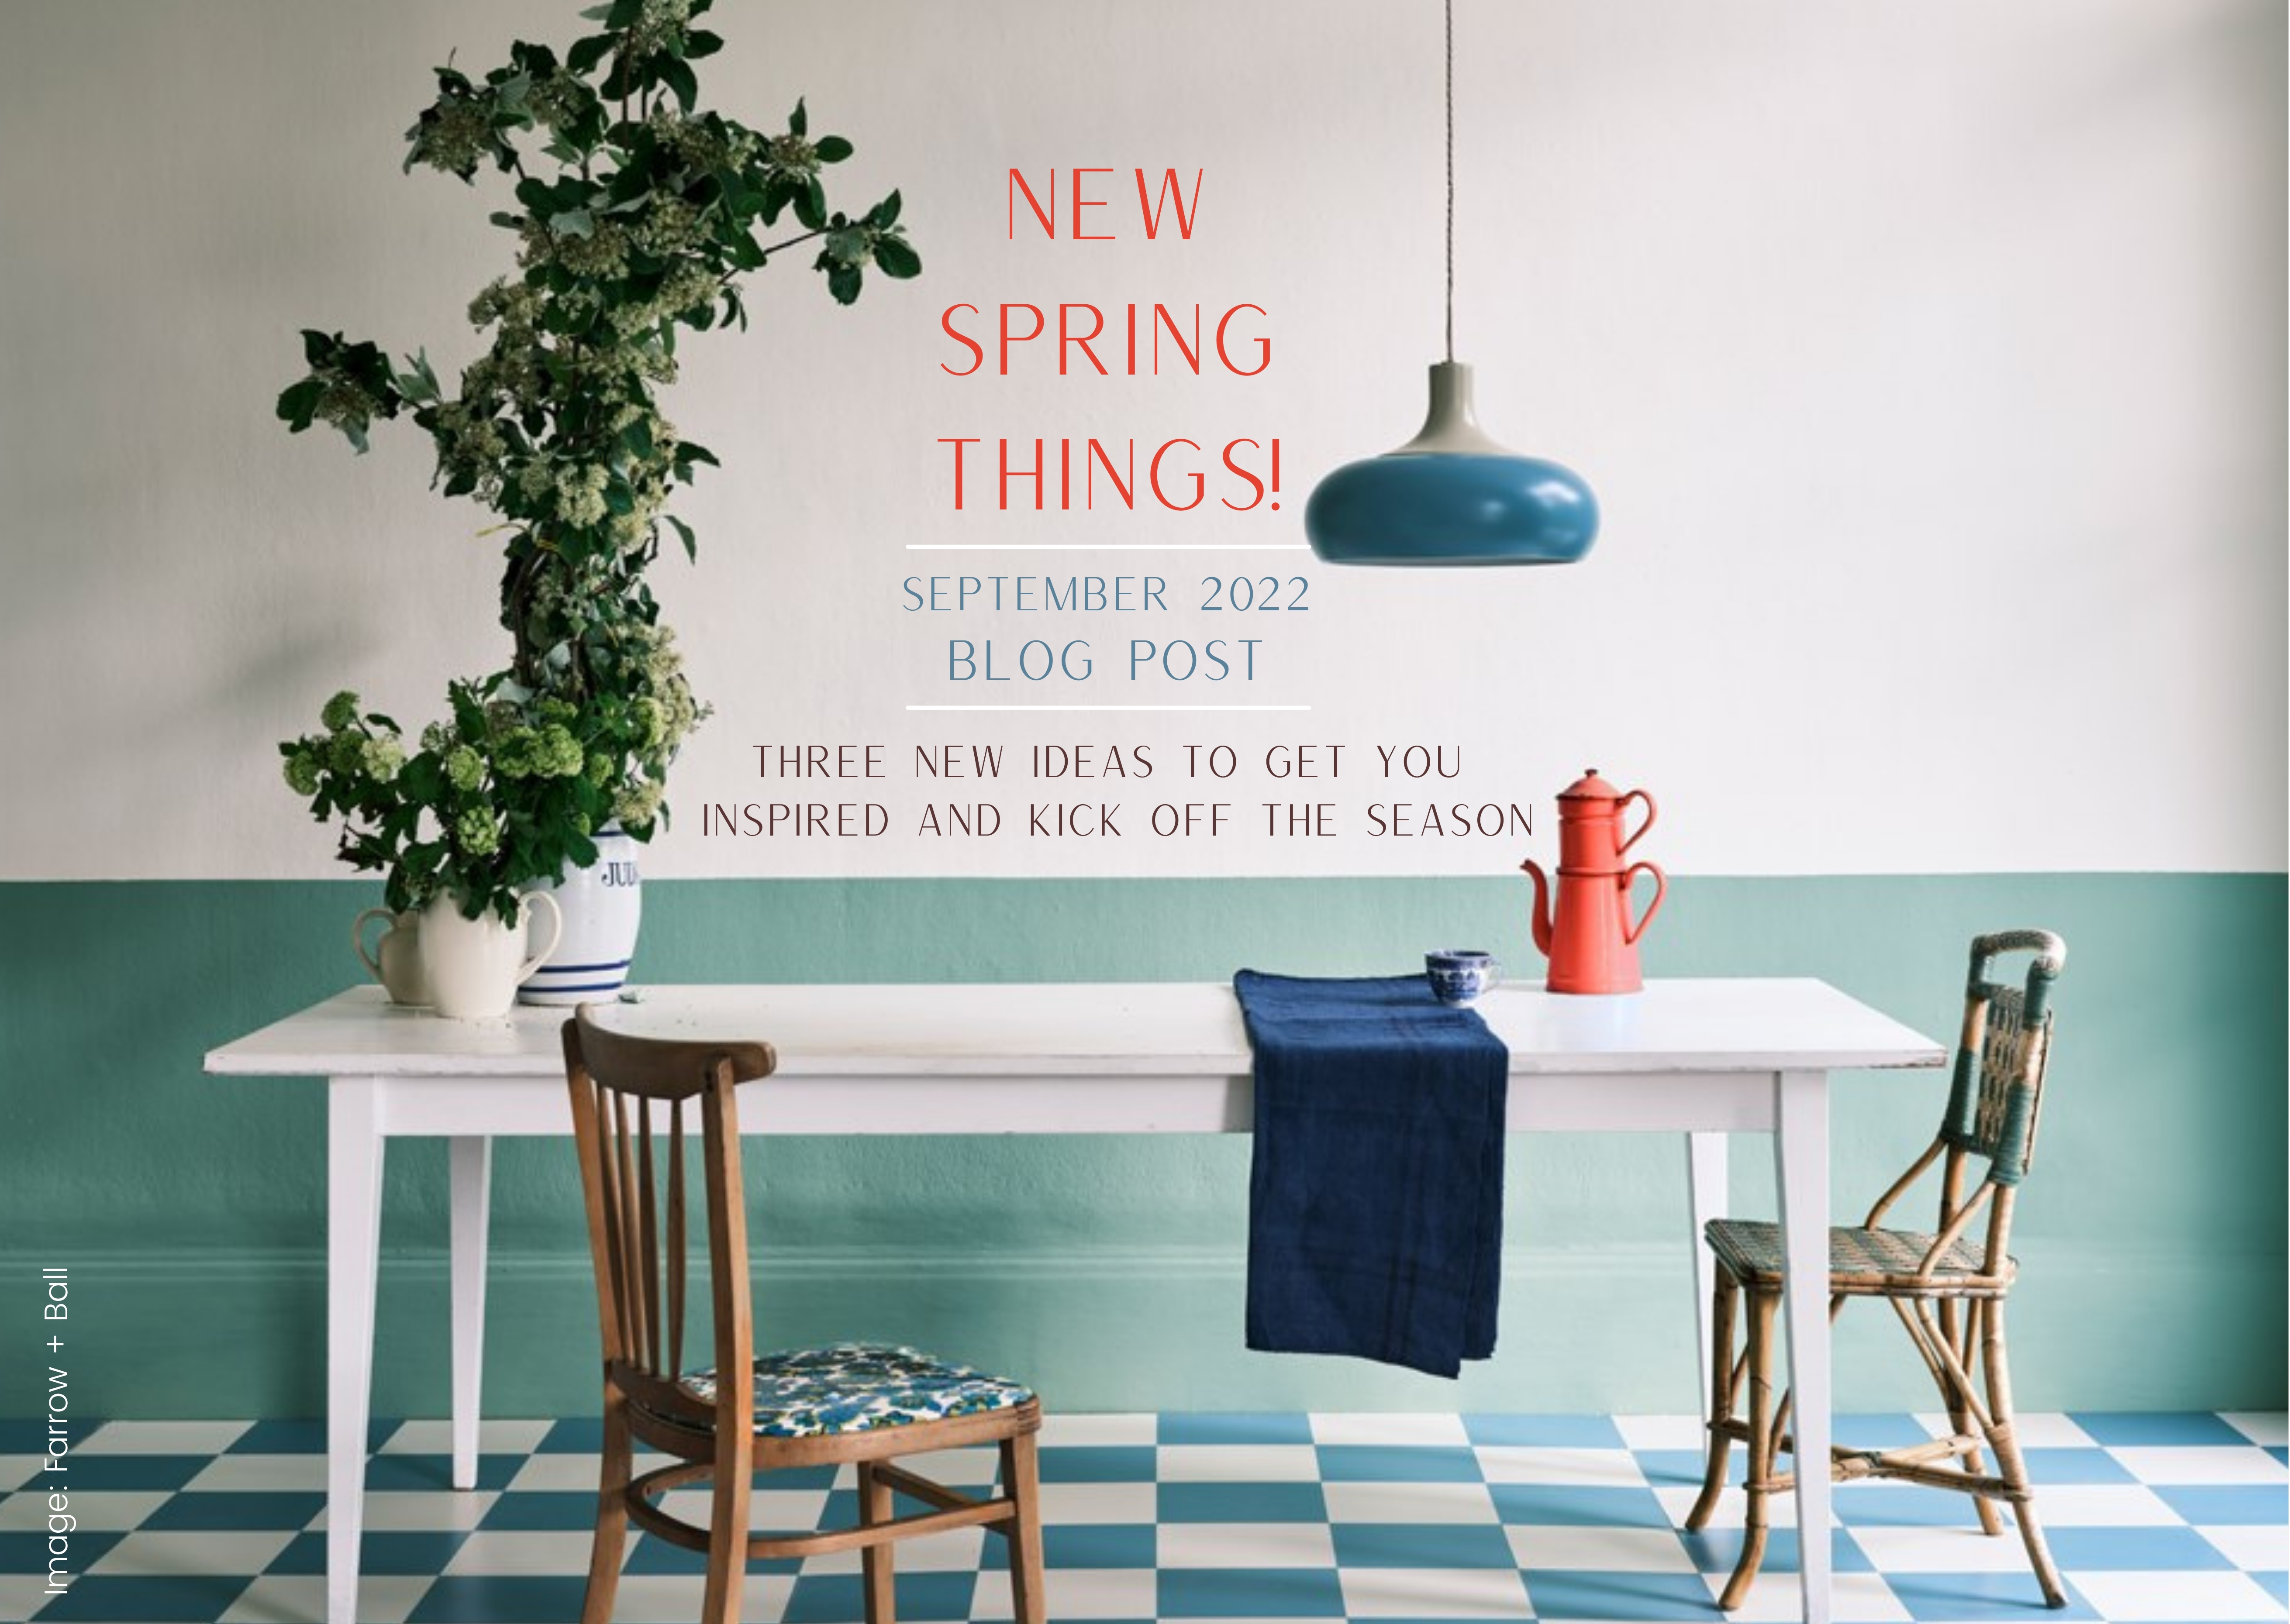 New Spring Things